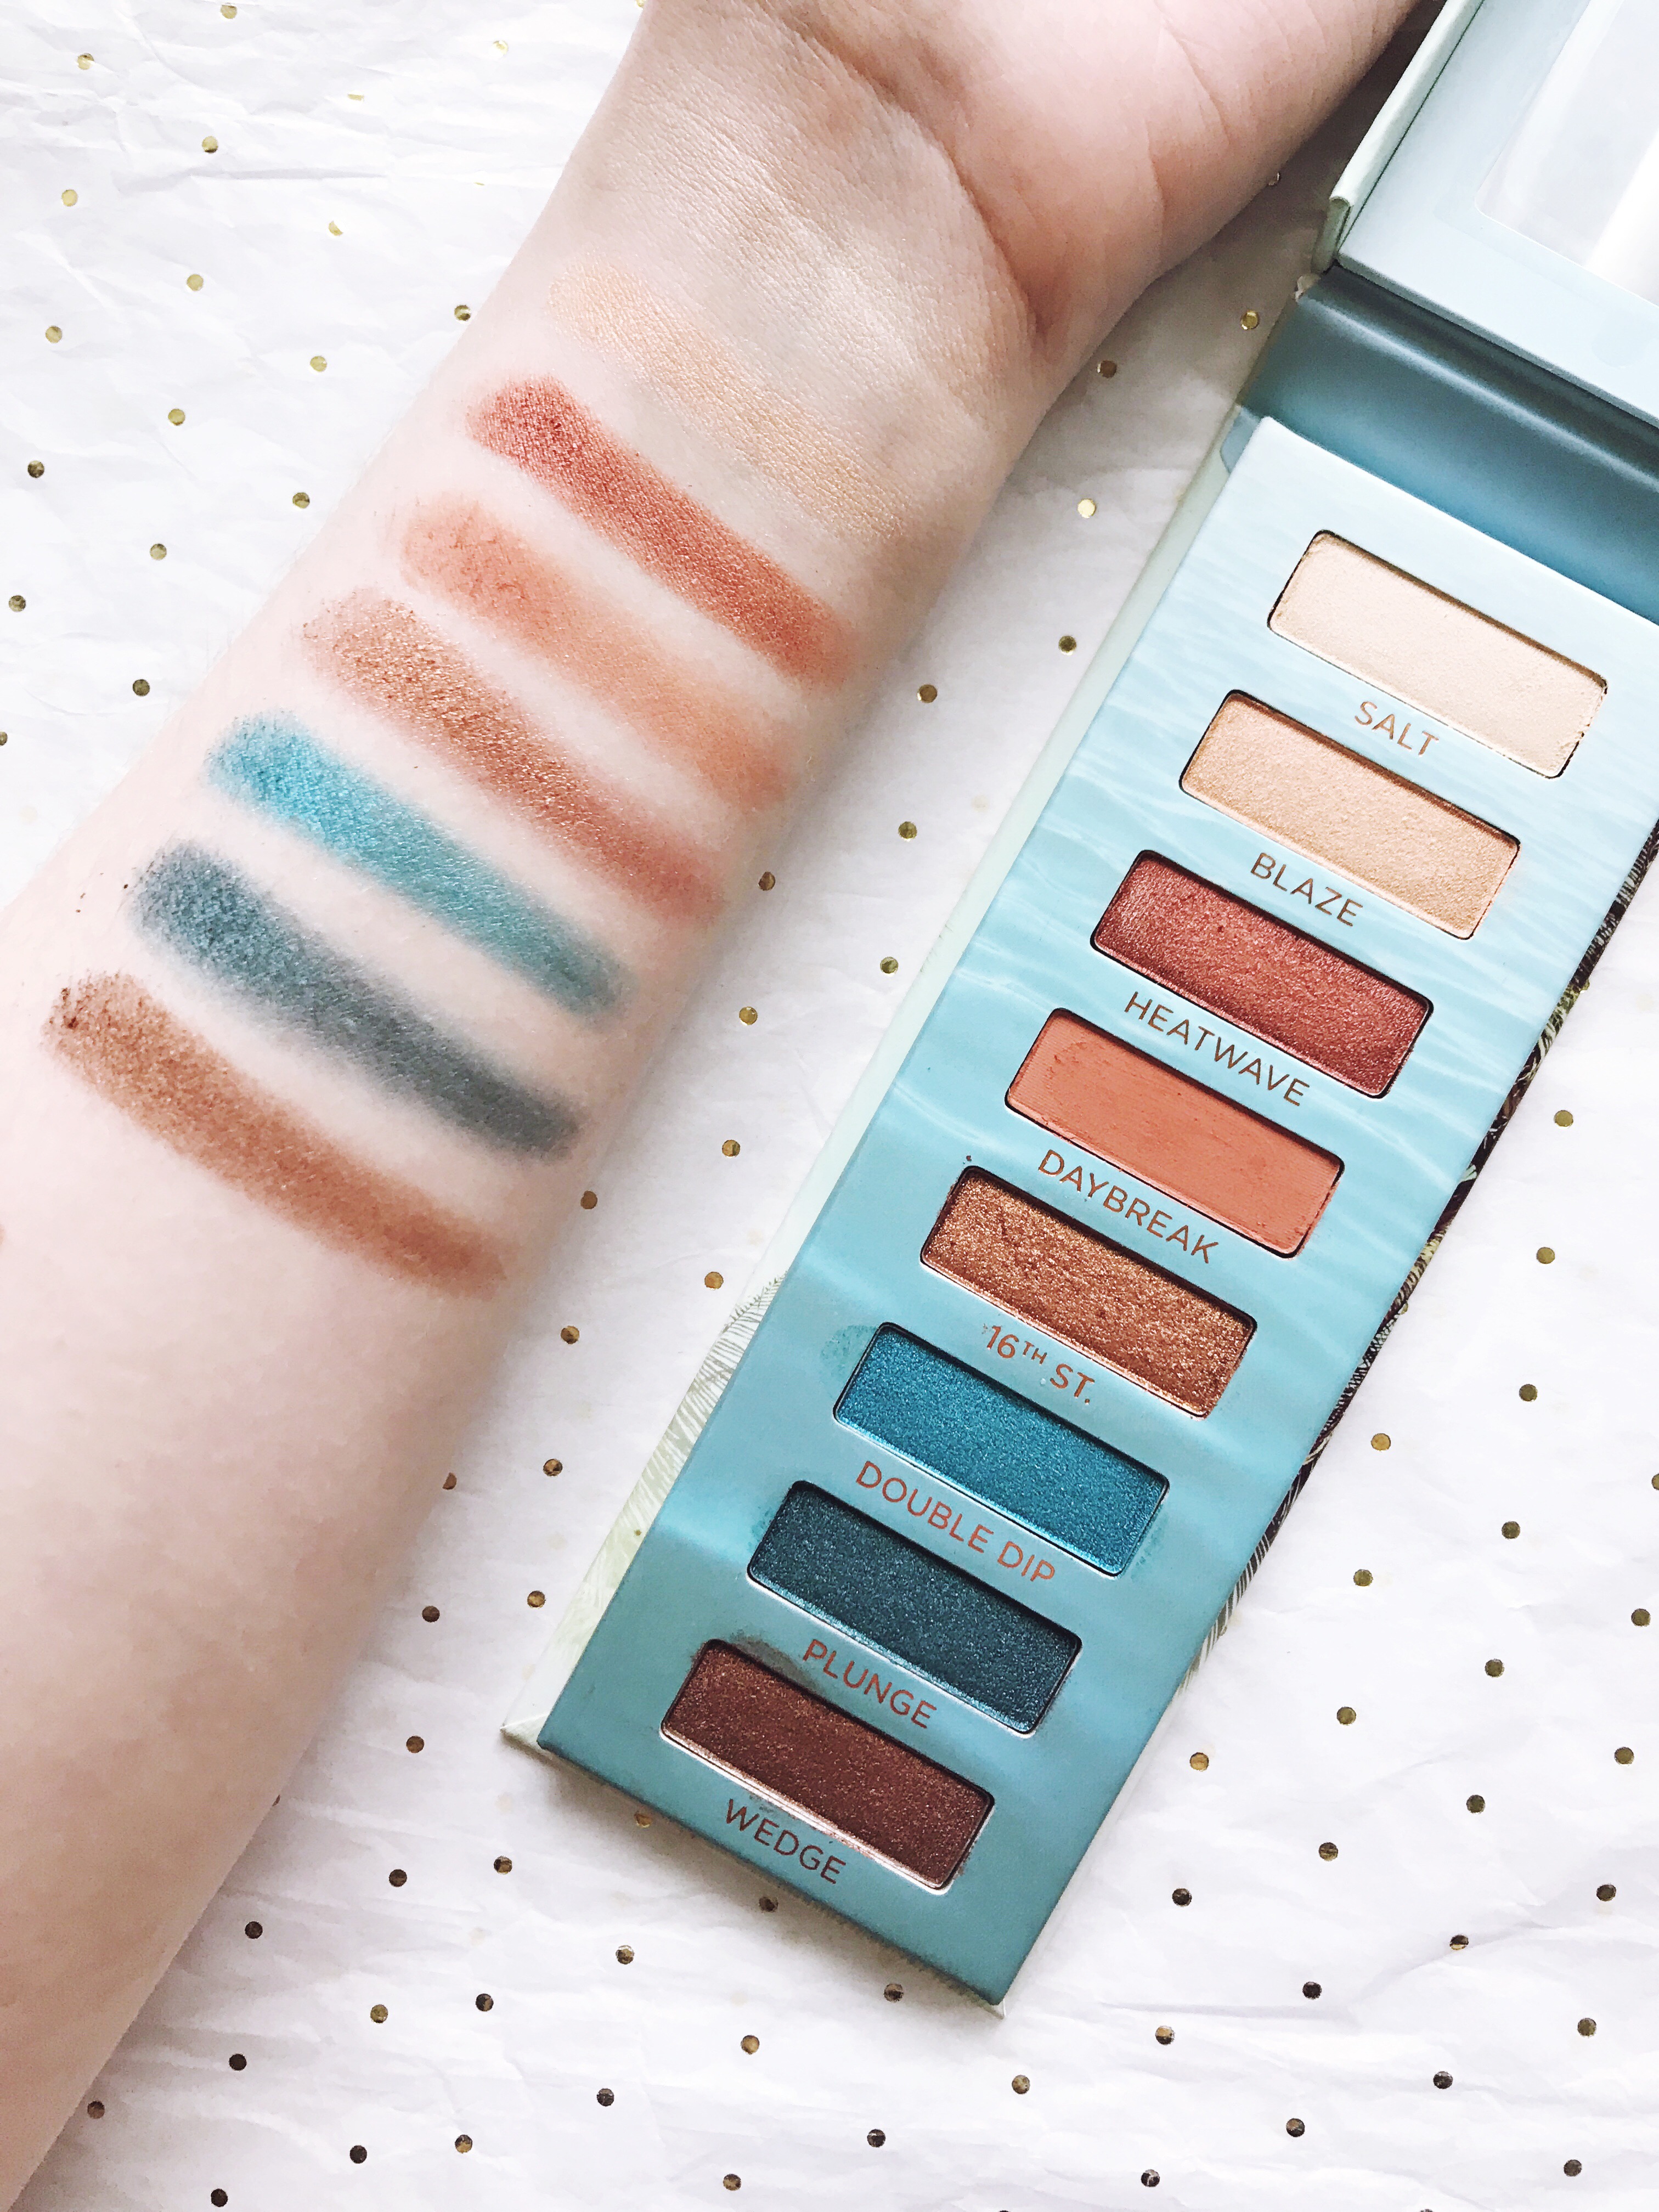 Urban Decay Beach Collection is giving me major mermaid vibes